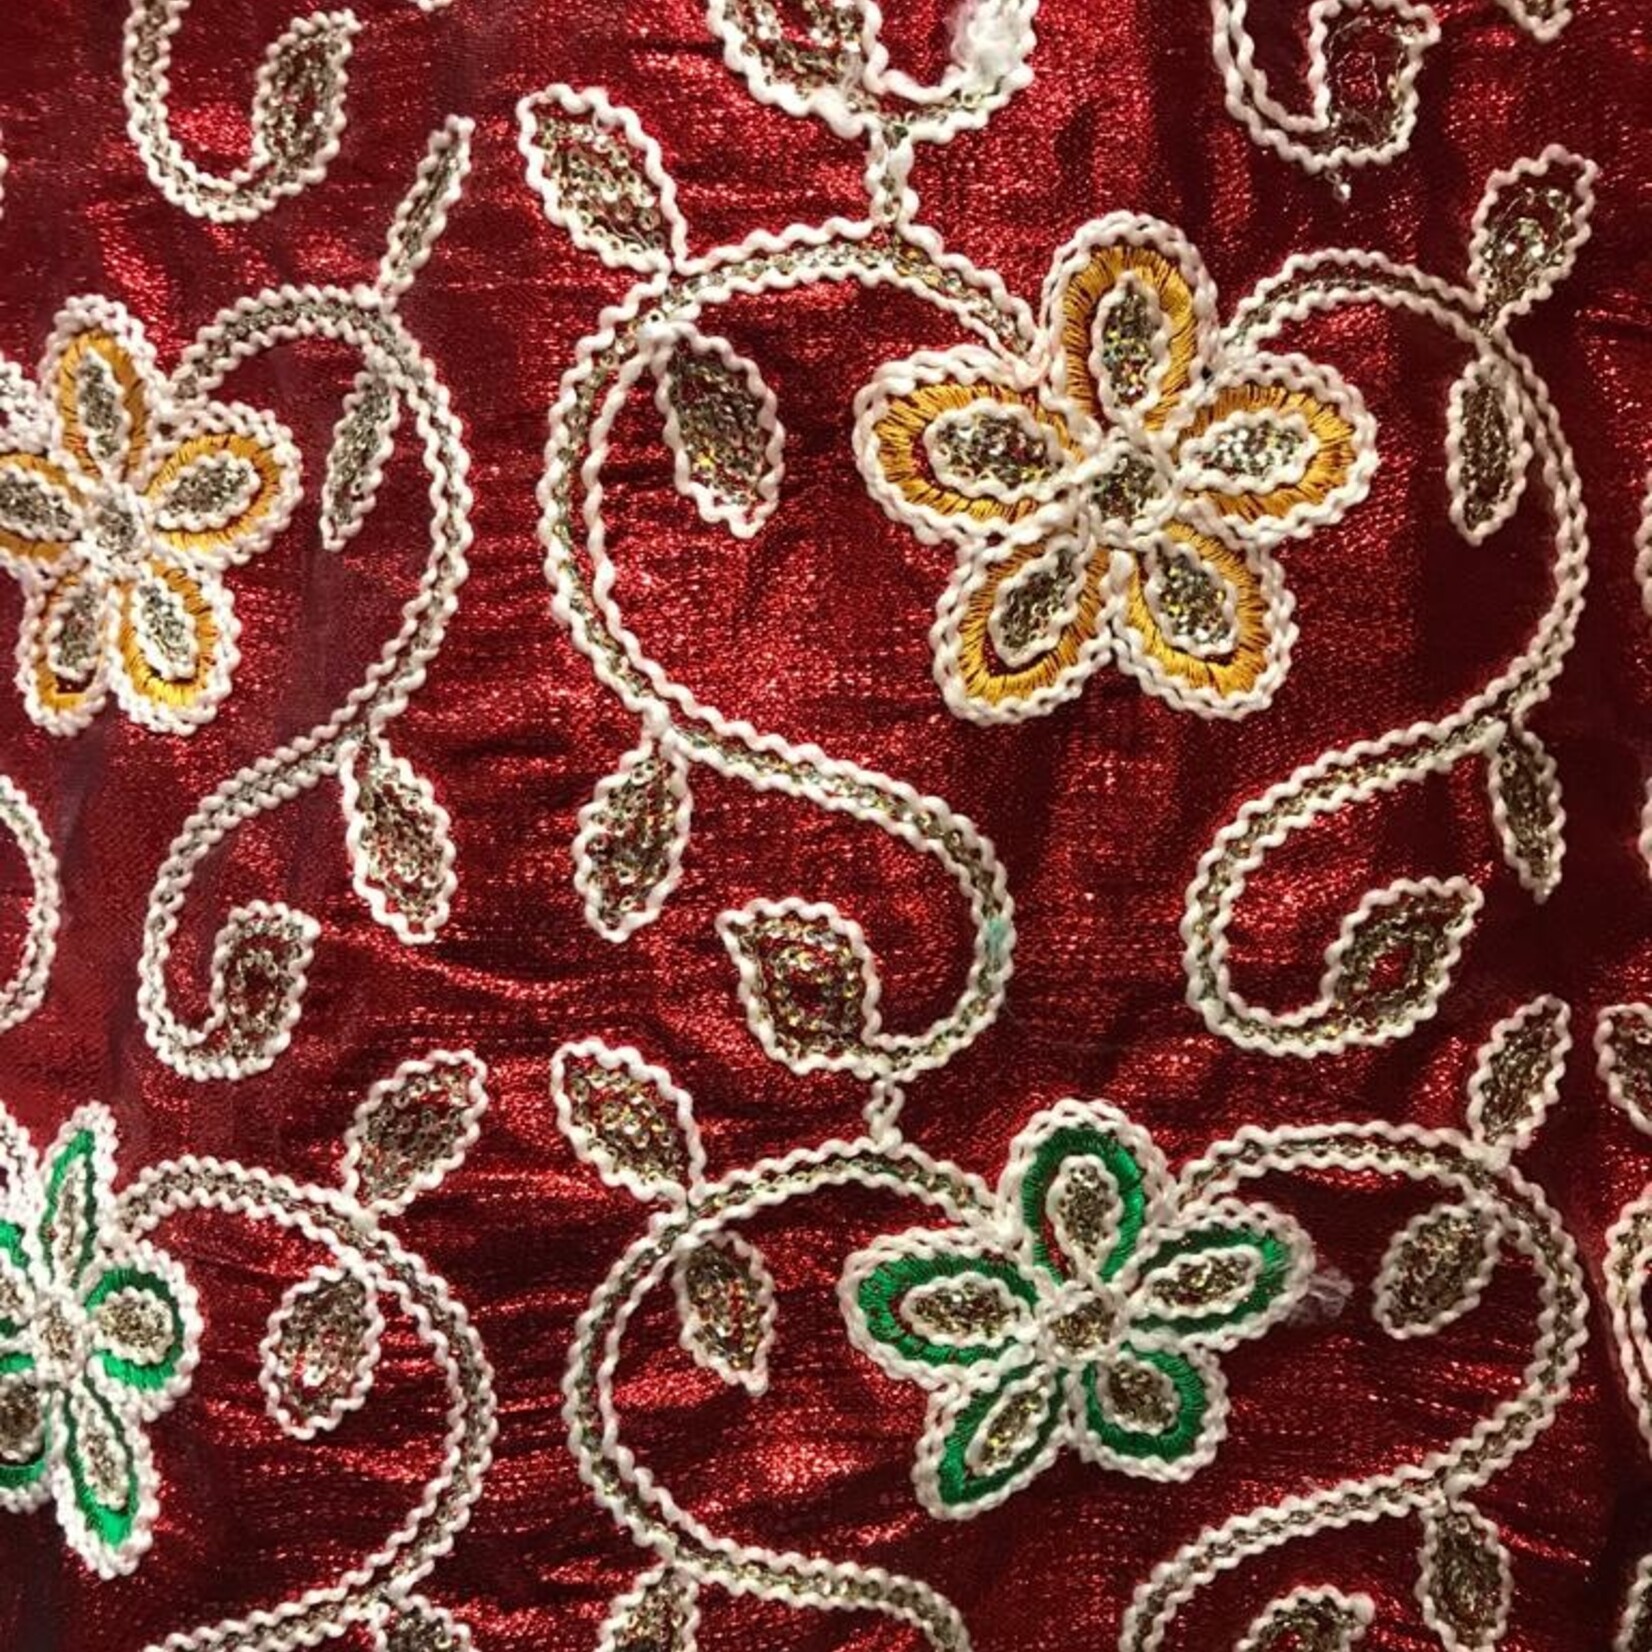 Embroided Flower Lame 44-45 Inches Red